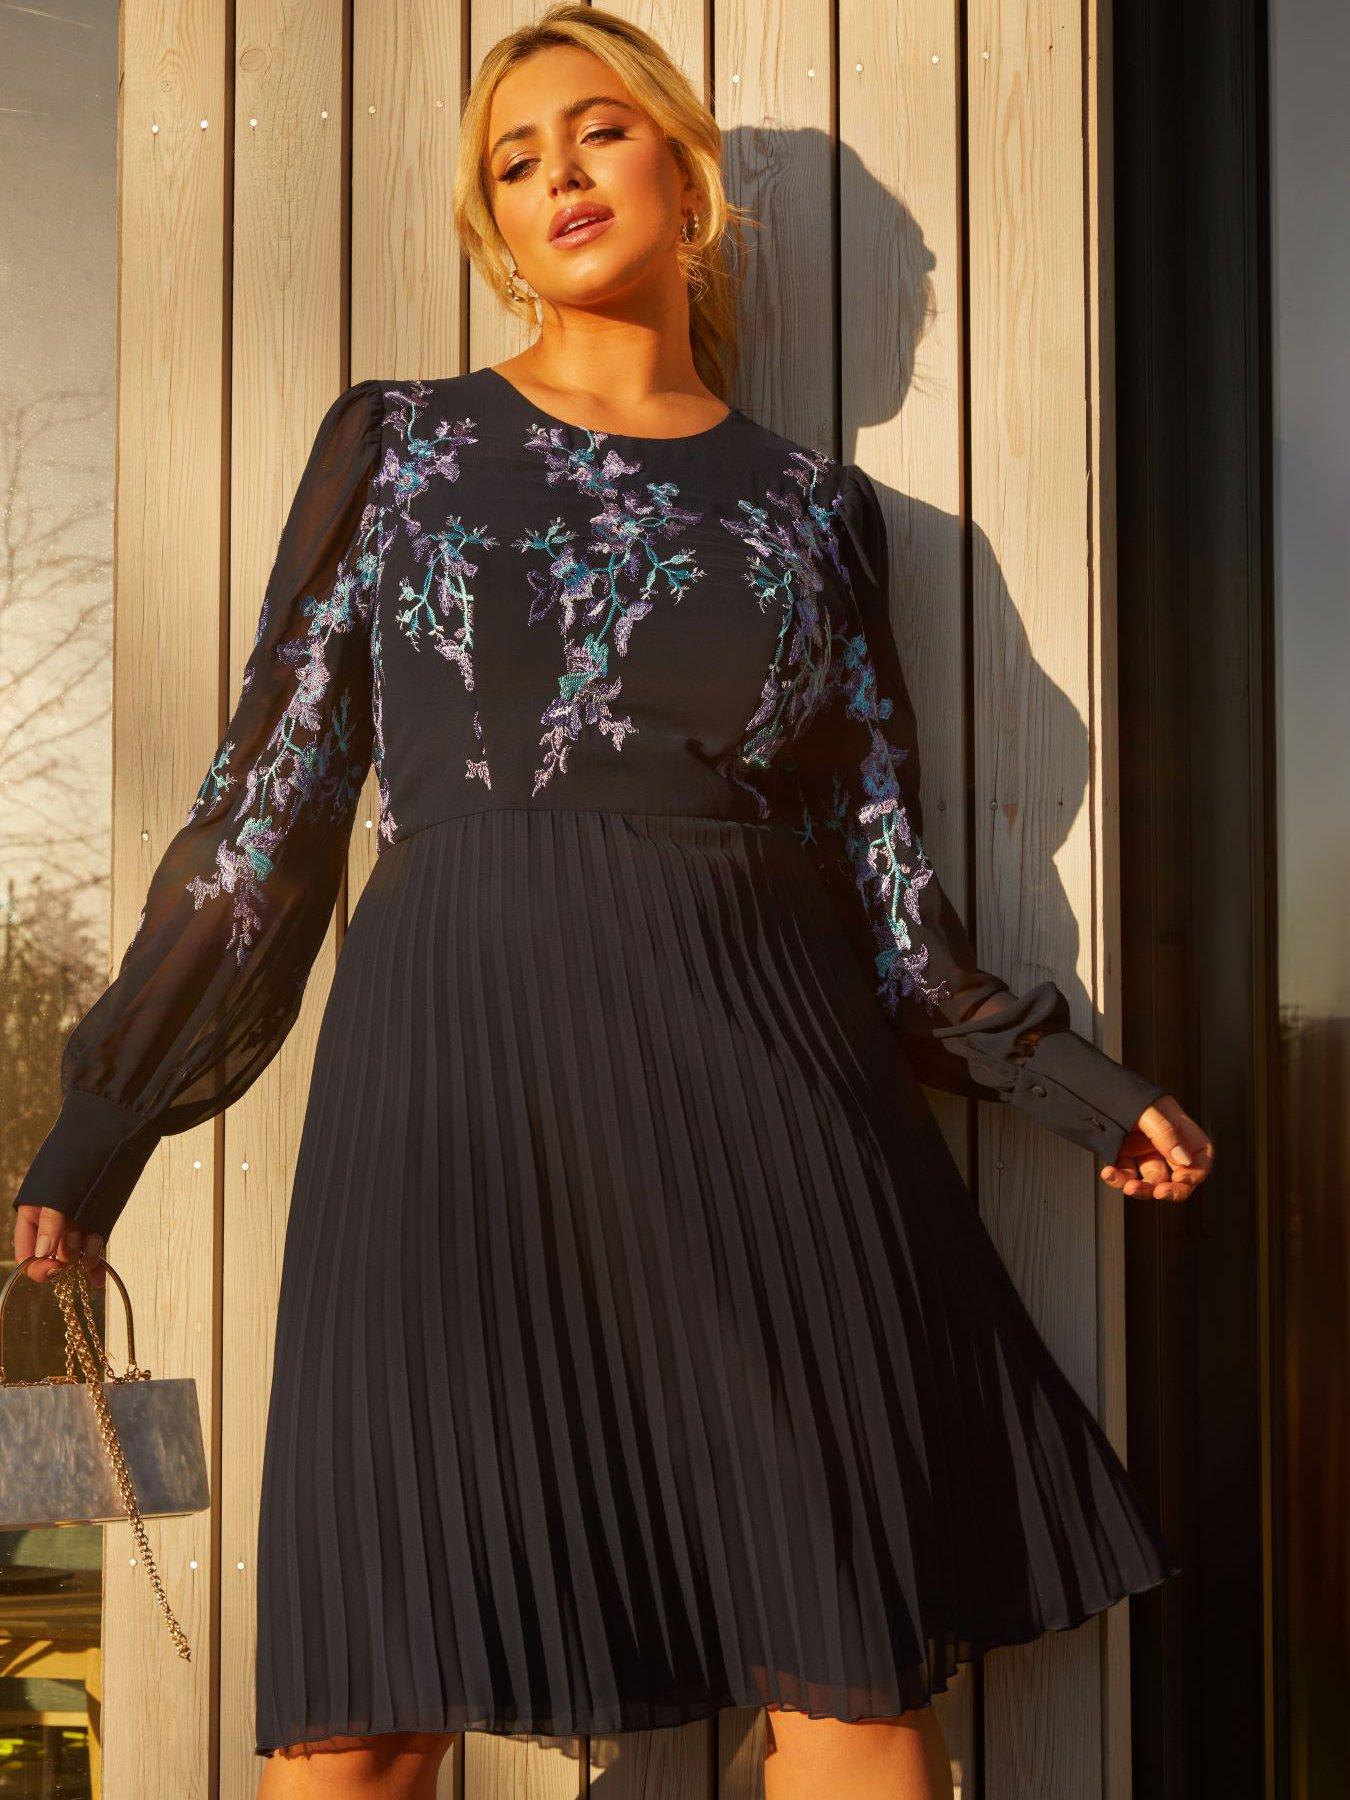 https://media.very.co.uk/i/very/V7QS4_SQ1_0000000048_NAVY_MDf/chi-chi-london-curve-chi-chi-curve-floral-embroidered-pleated-midi-dress-in-navy.jpg?$180x240_retinamobilex2$